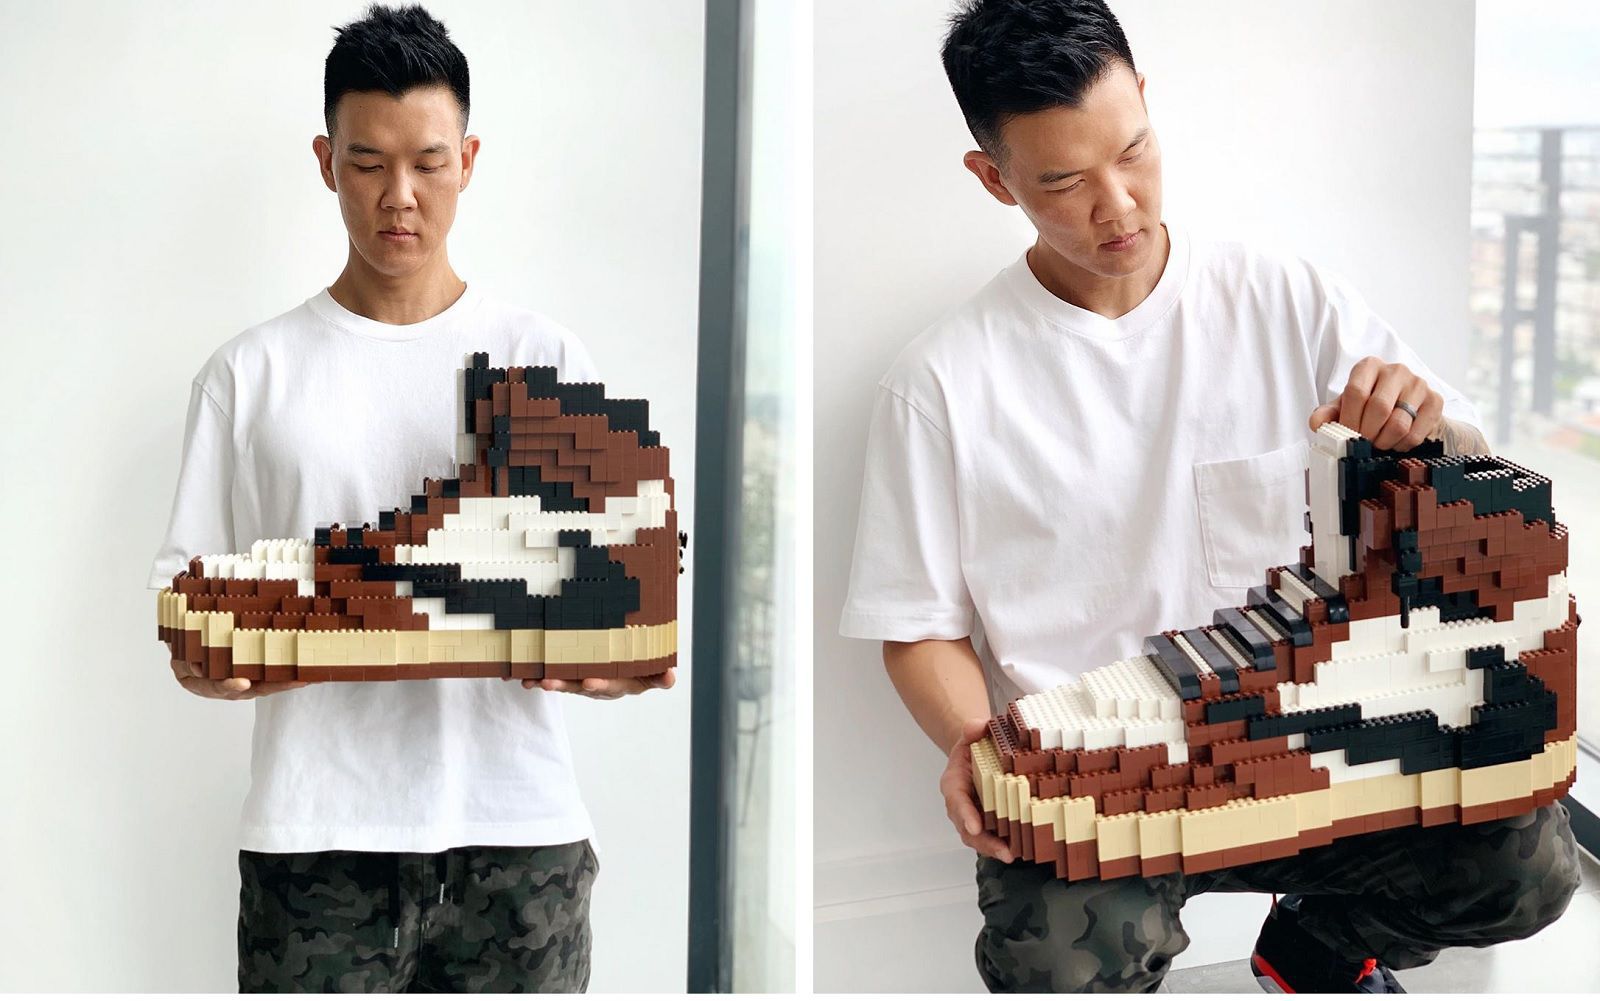 The sneakers made with Lego bricks by Tom Yoo  The artist recreated some of the most popular kicks in colourful brick-forms